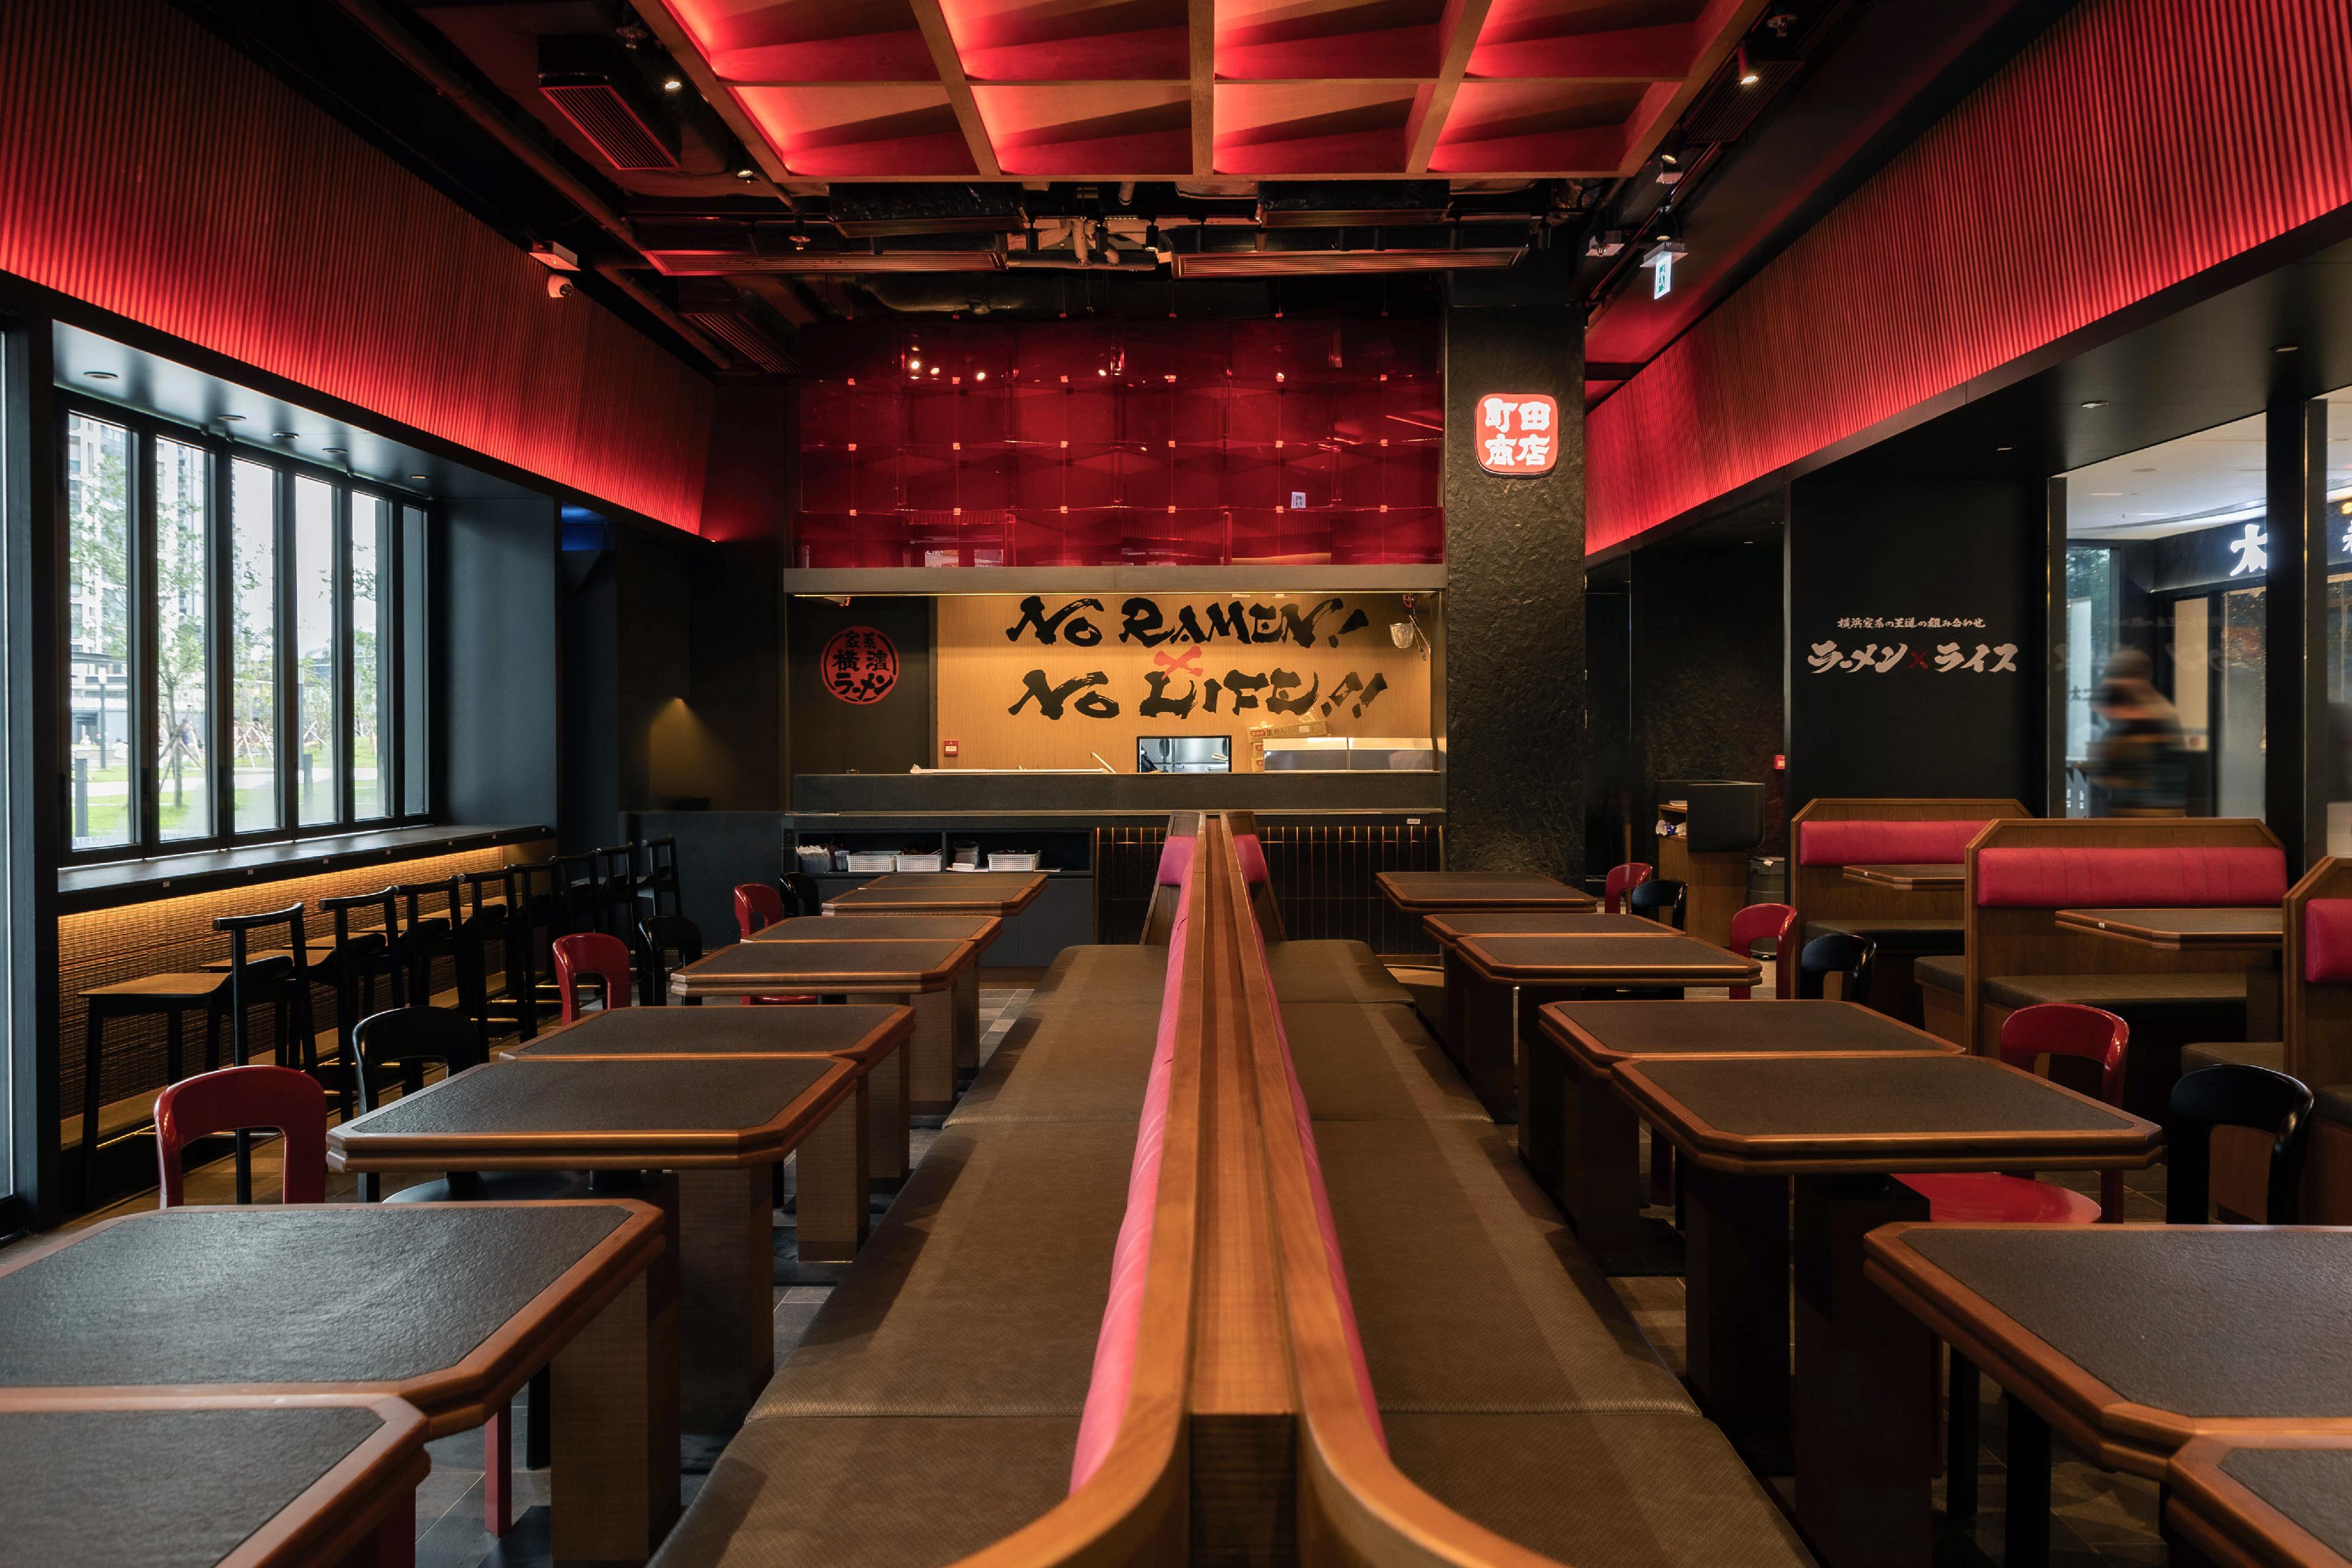 Invest Hong Kong (InvestHK) announced that Gift Holdings Inc from Japan opened its first “Machida Shoten” ramen store in Hong Kong today (June 27), bringing authentic Yokohama style ramen to the city. Photo shows the interior design of its first store. 

